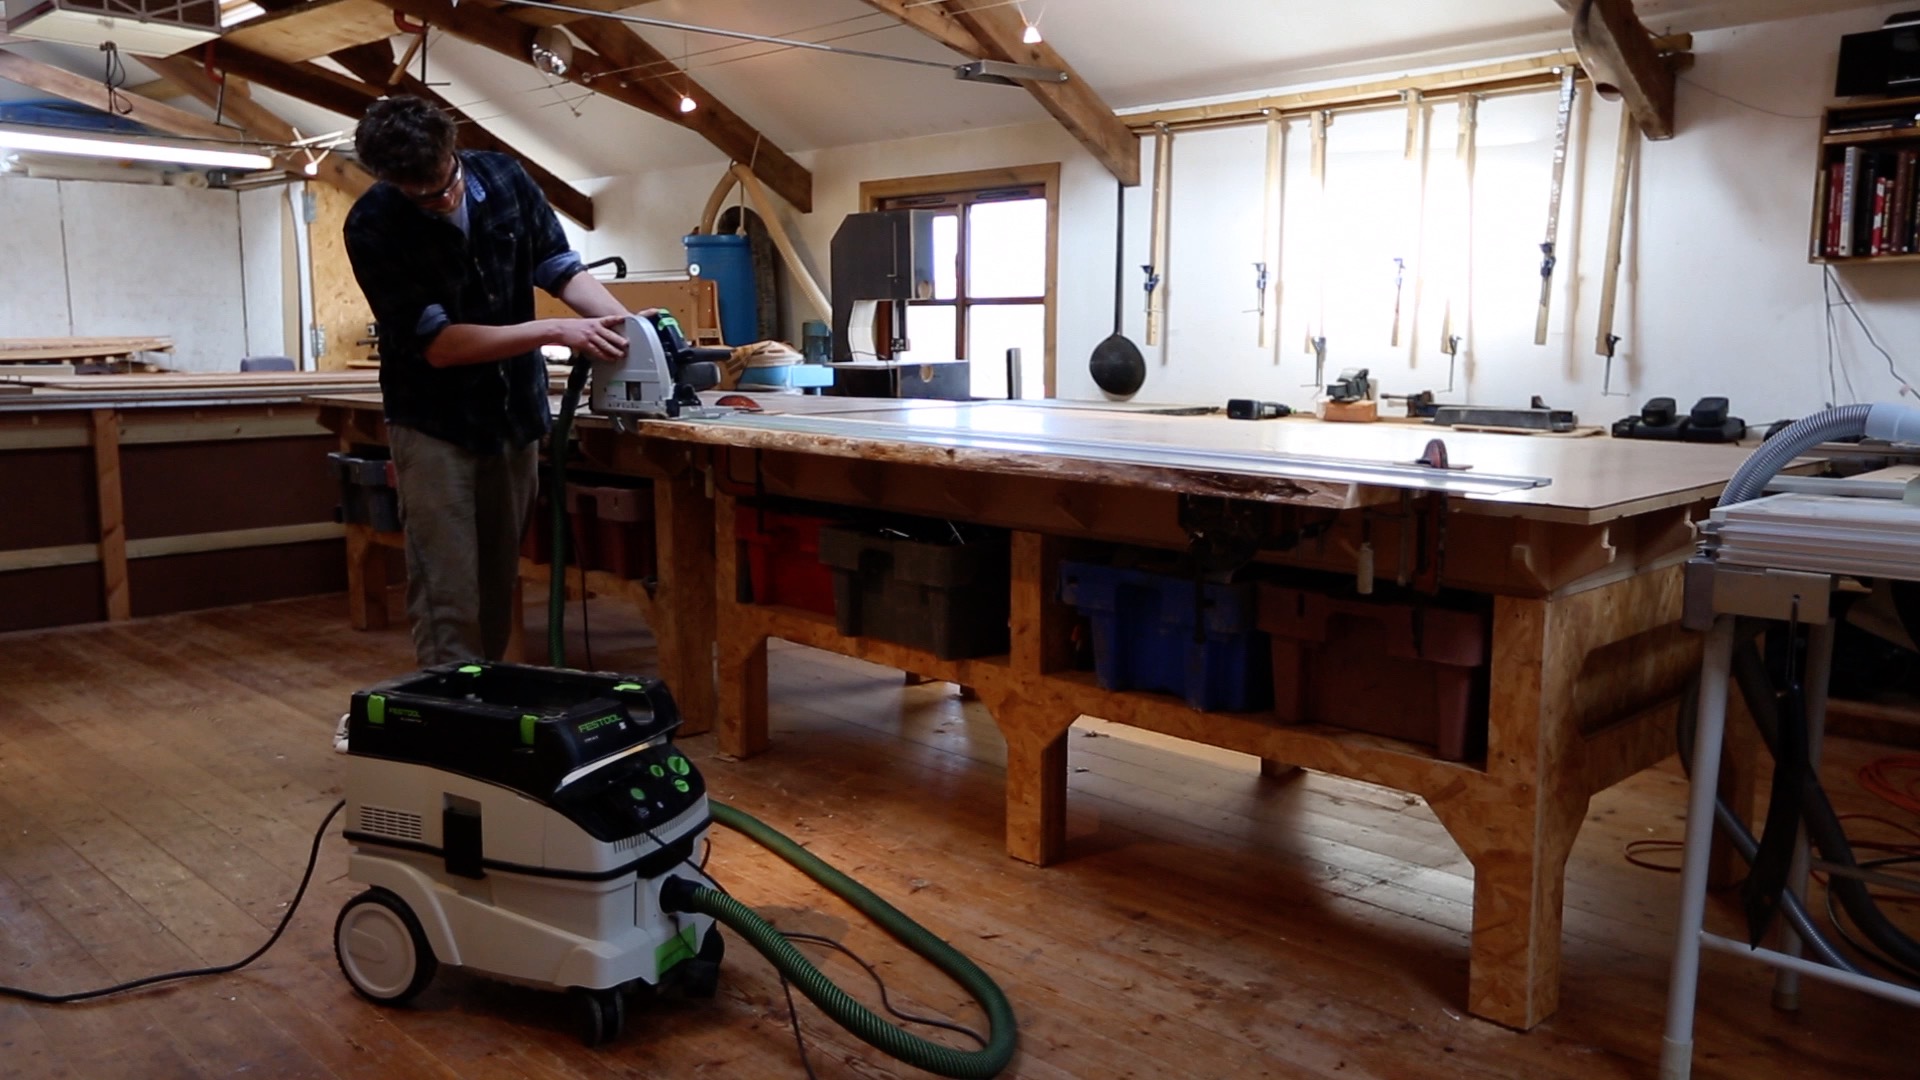  Emily Harris seeks to find out the craft of making wooden surfboards at Lignum Surfboards and why using Festool tools is key in their manufacturing.  